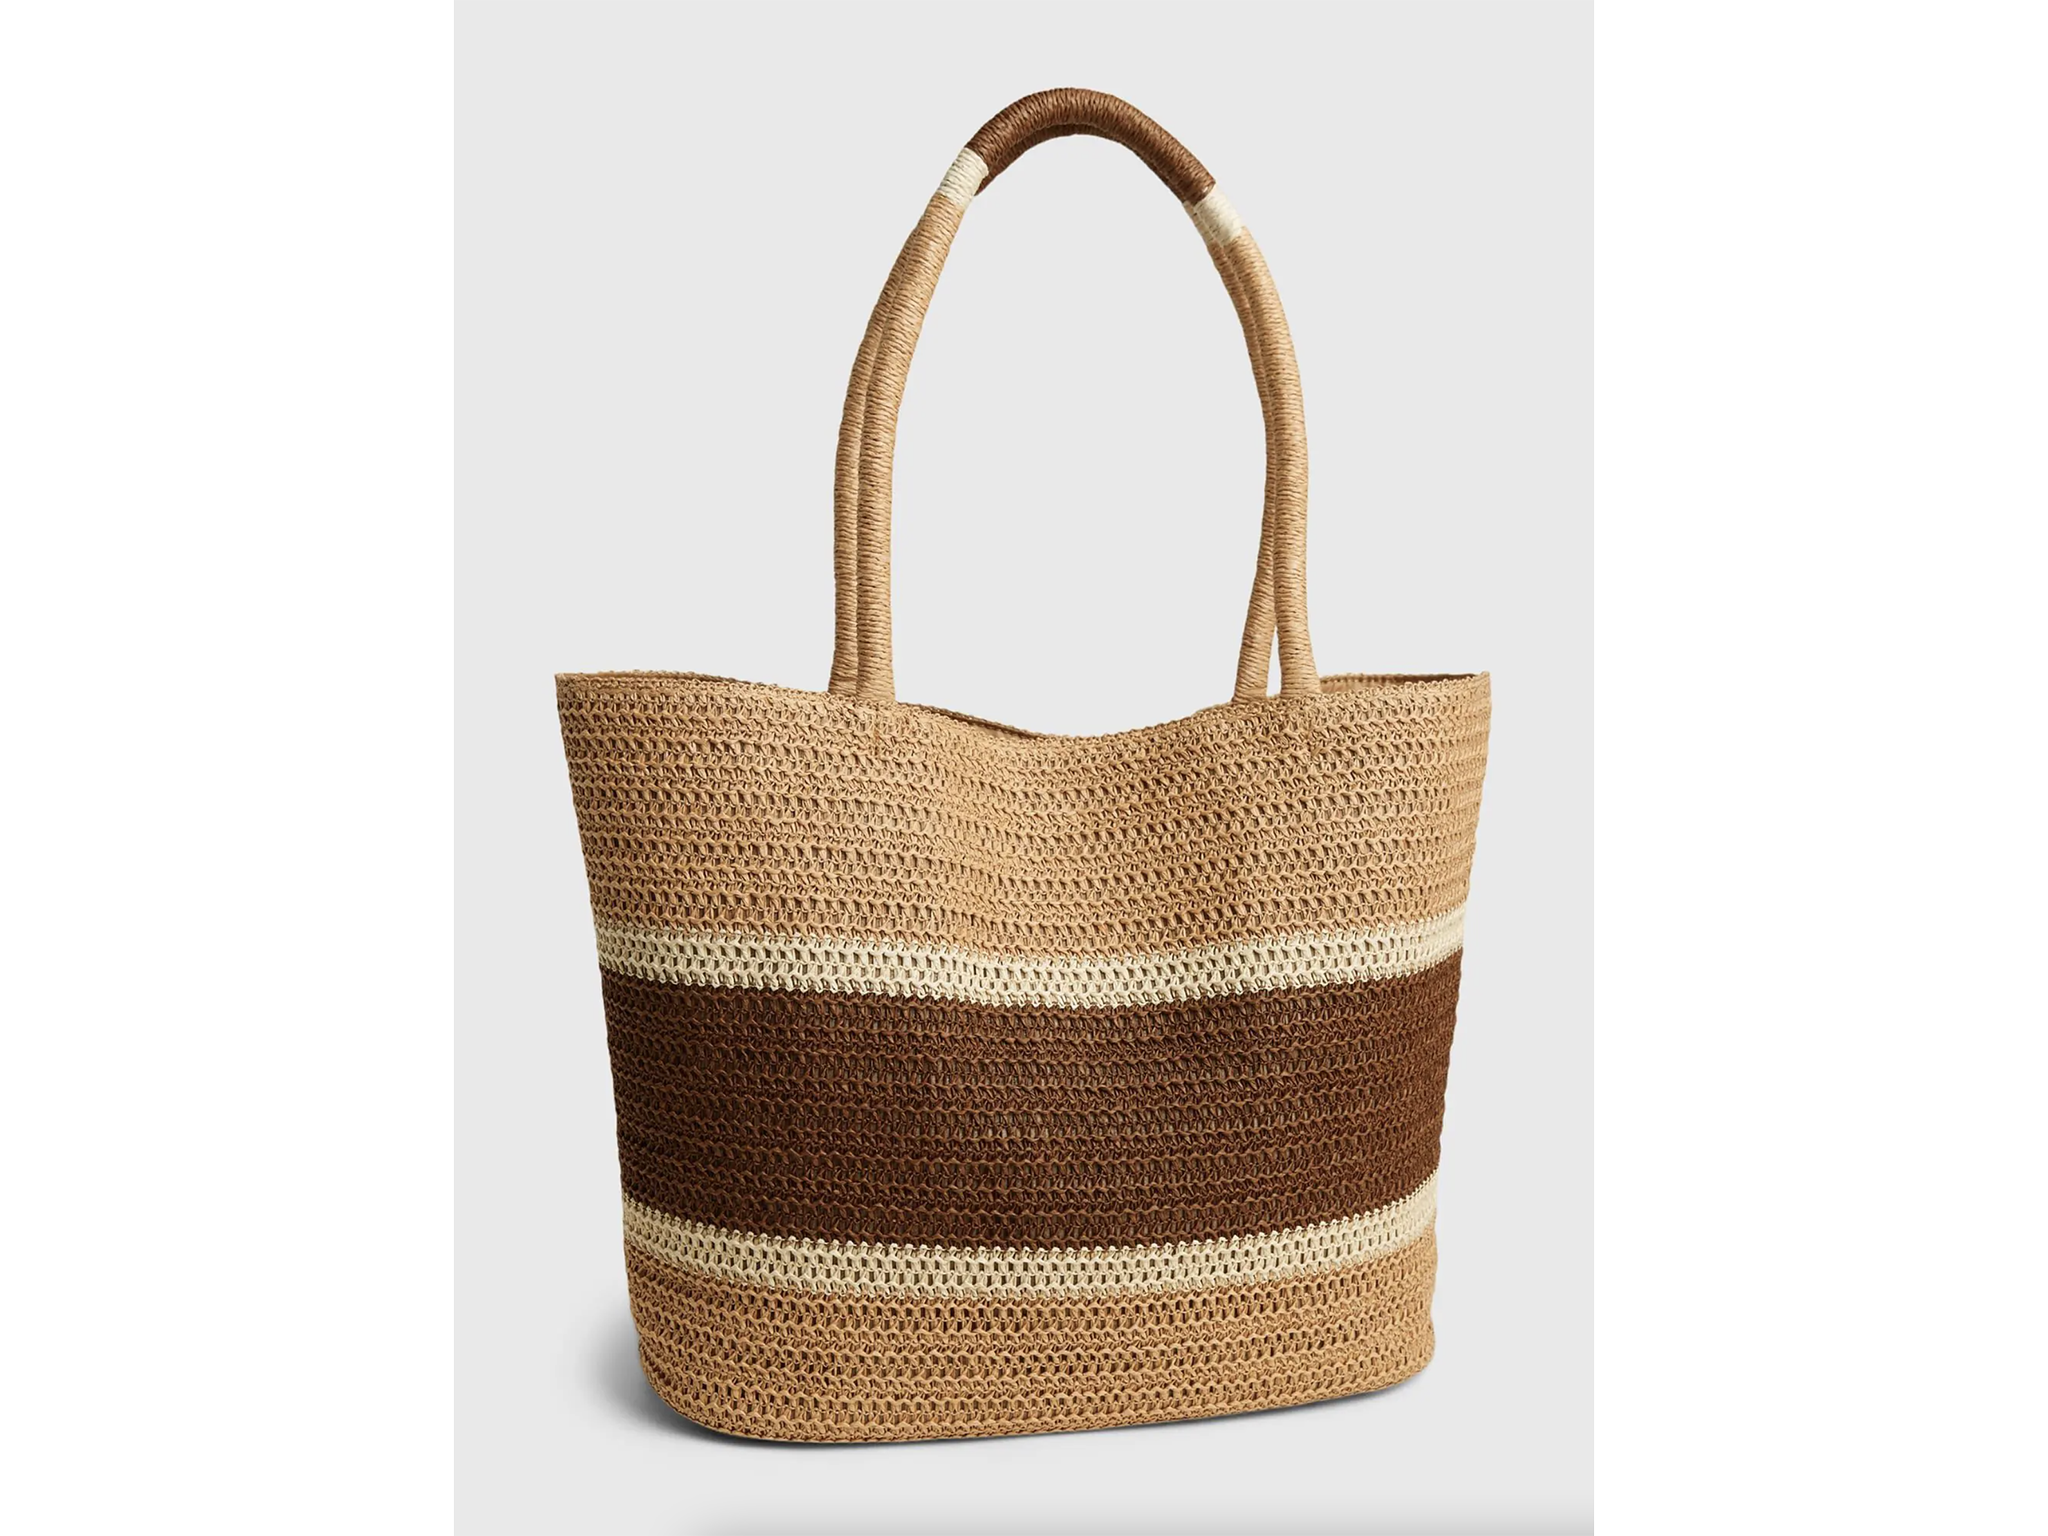 Gap straw tote bag: Was £39.95, now £27.96, Gap.co.uk